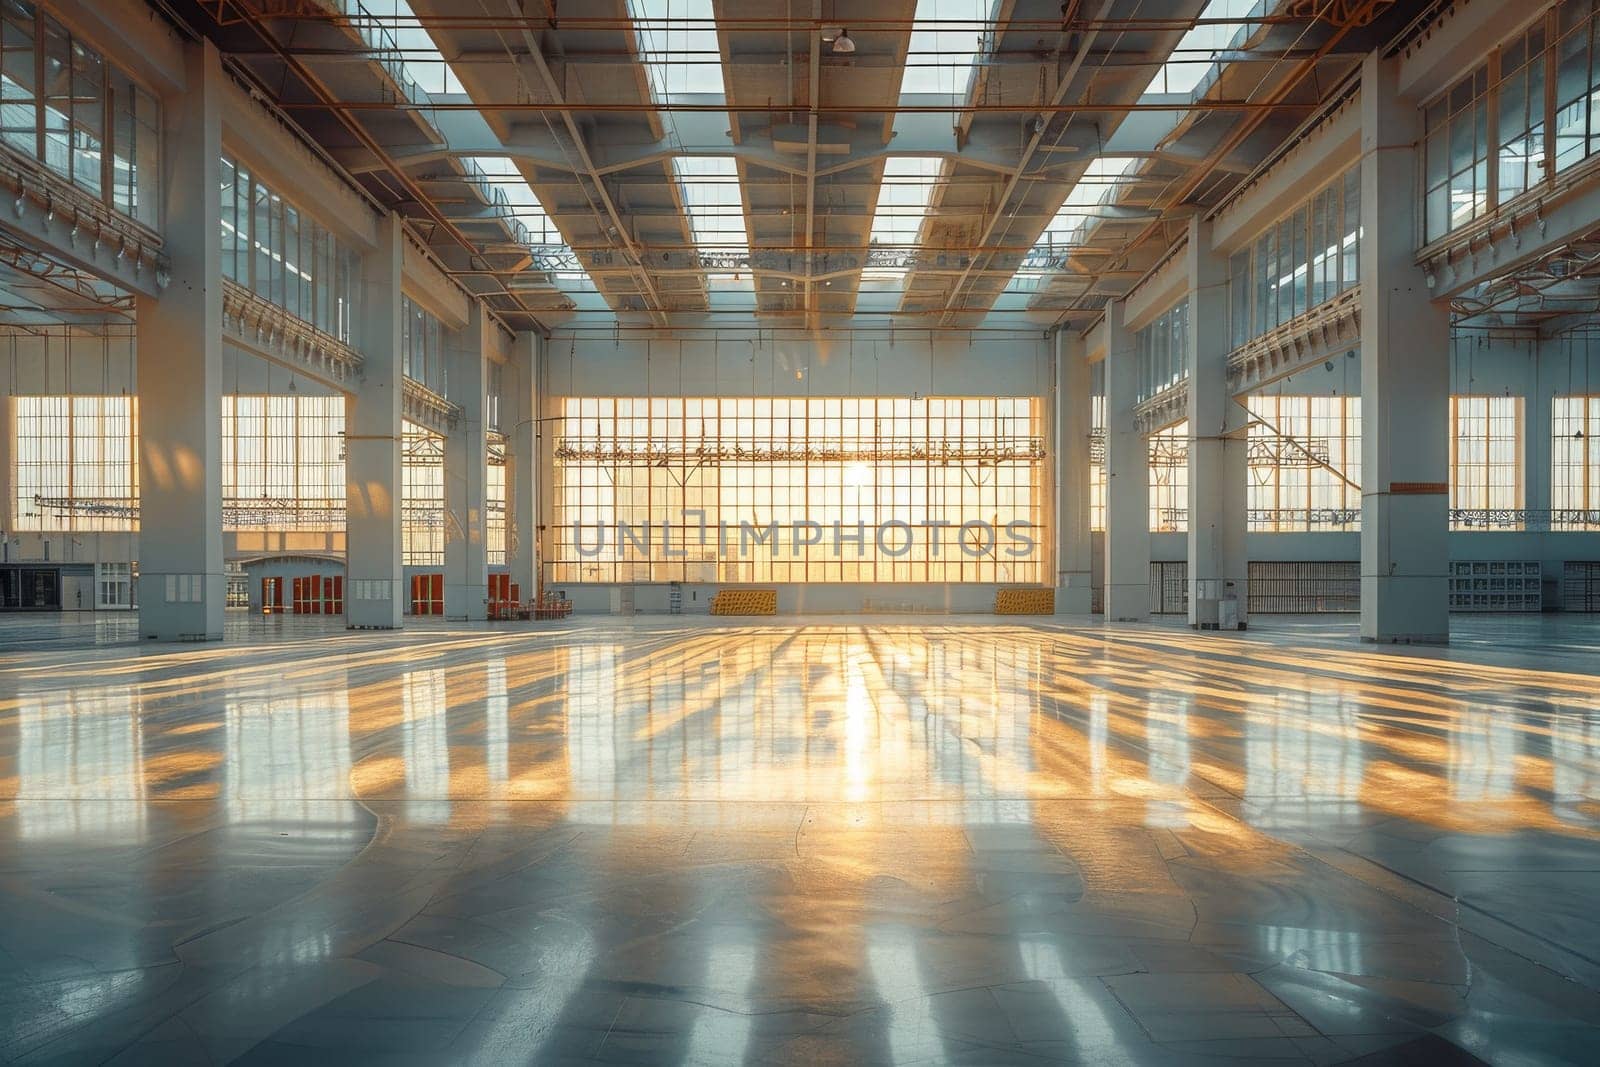 A large, empty building with a lot of windows and a high ceiling. The space is very open and airy, with a lot of natural light coming in from the windows